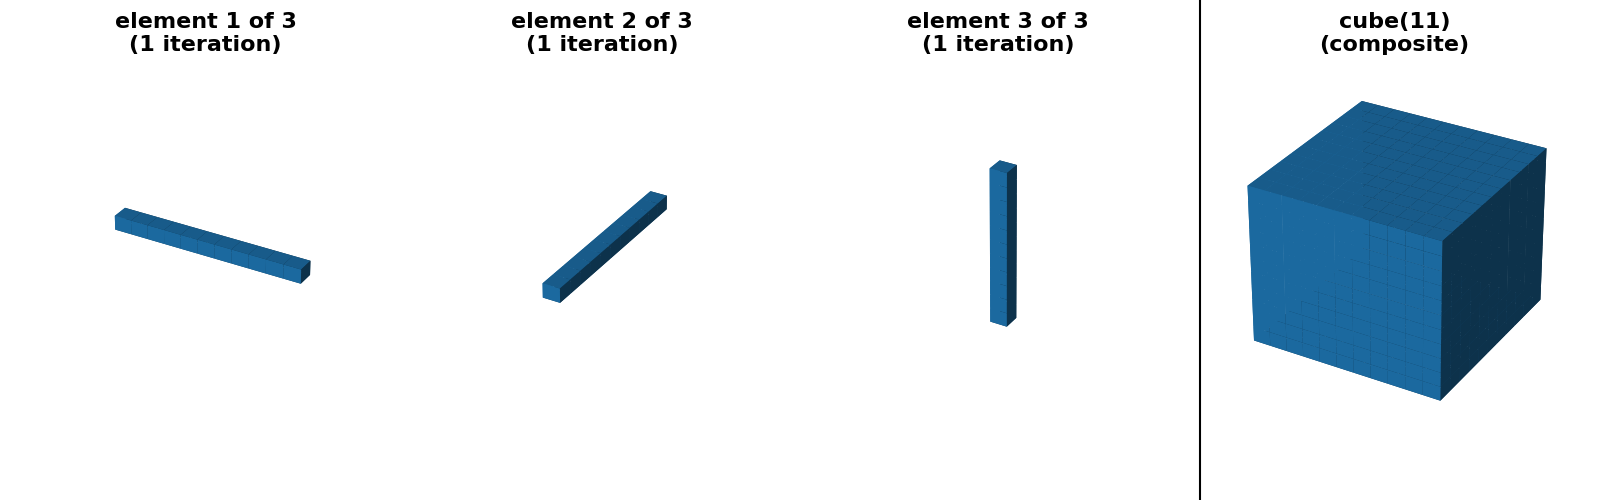 cube(11) (composite), element 1 of 3 (1 iteration), element 2 of 3 (1 iteration), element 3 of 3 (1 iteration)